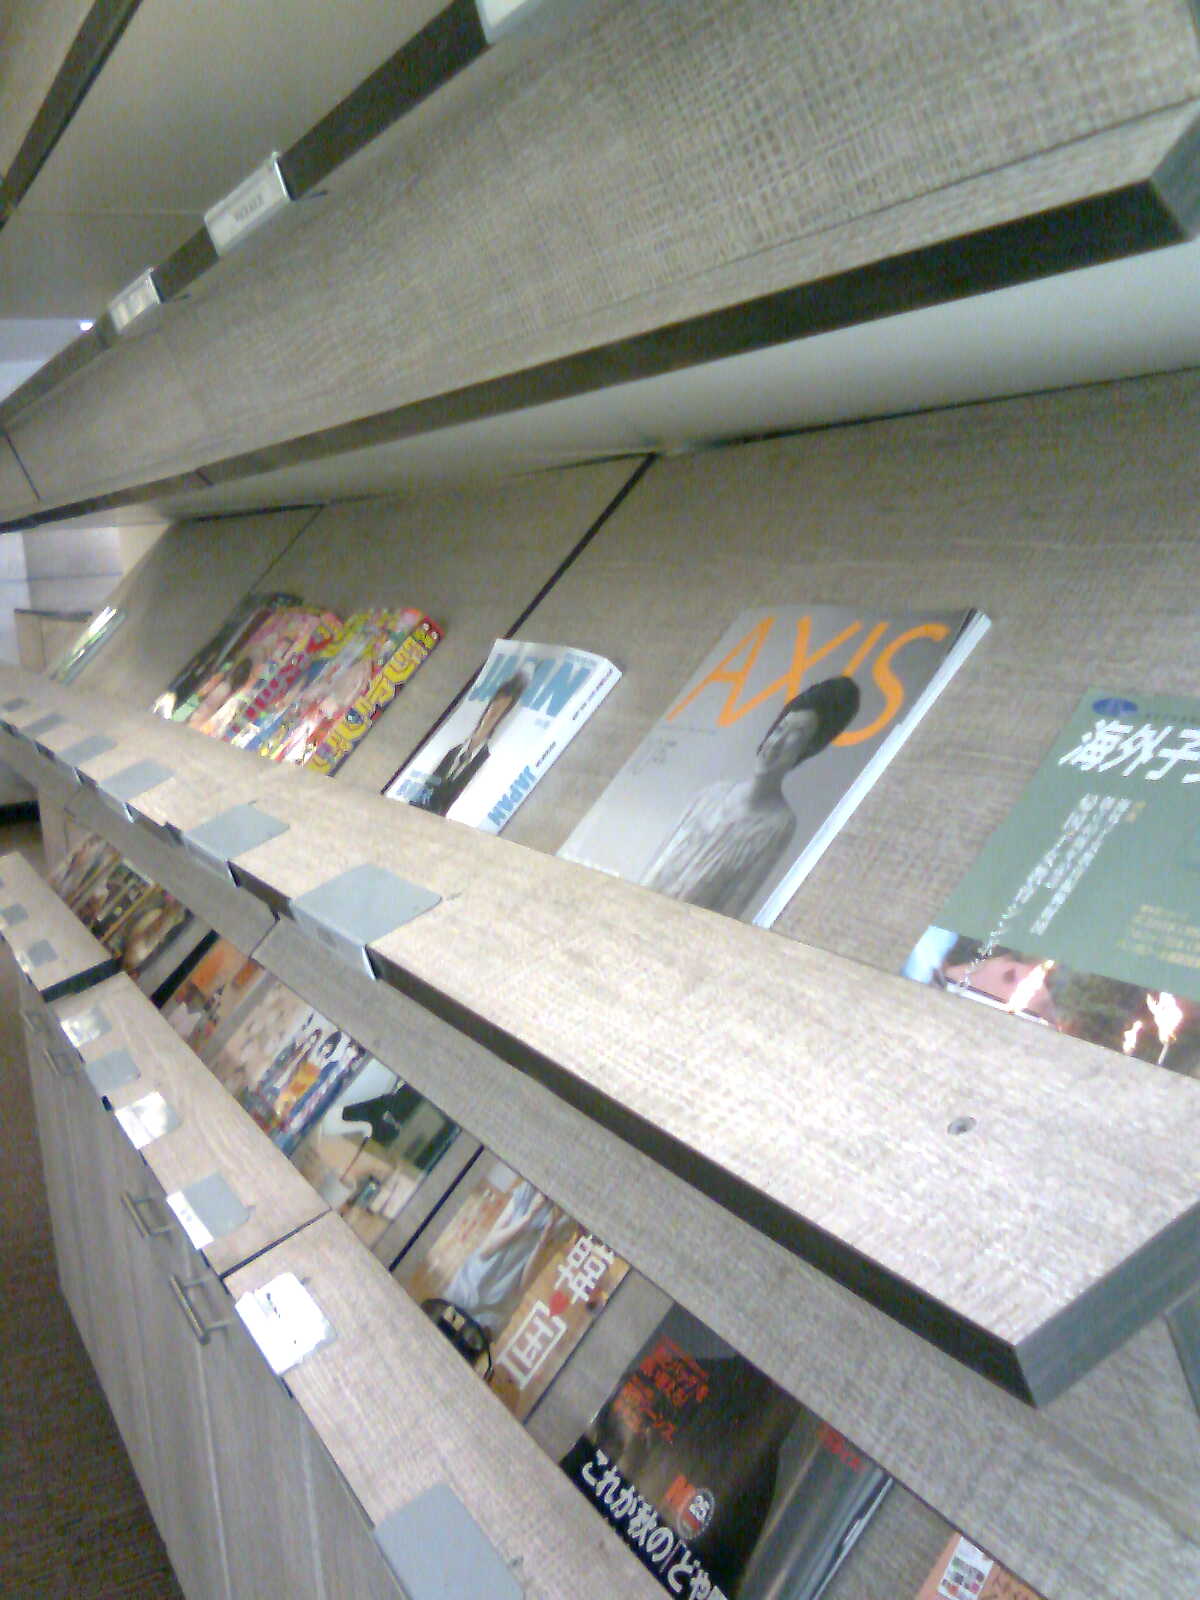 Periodicals Japan Foundation Library, New Delhi